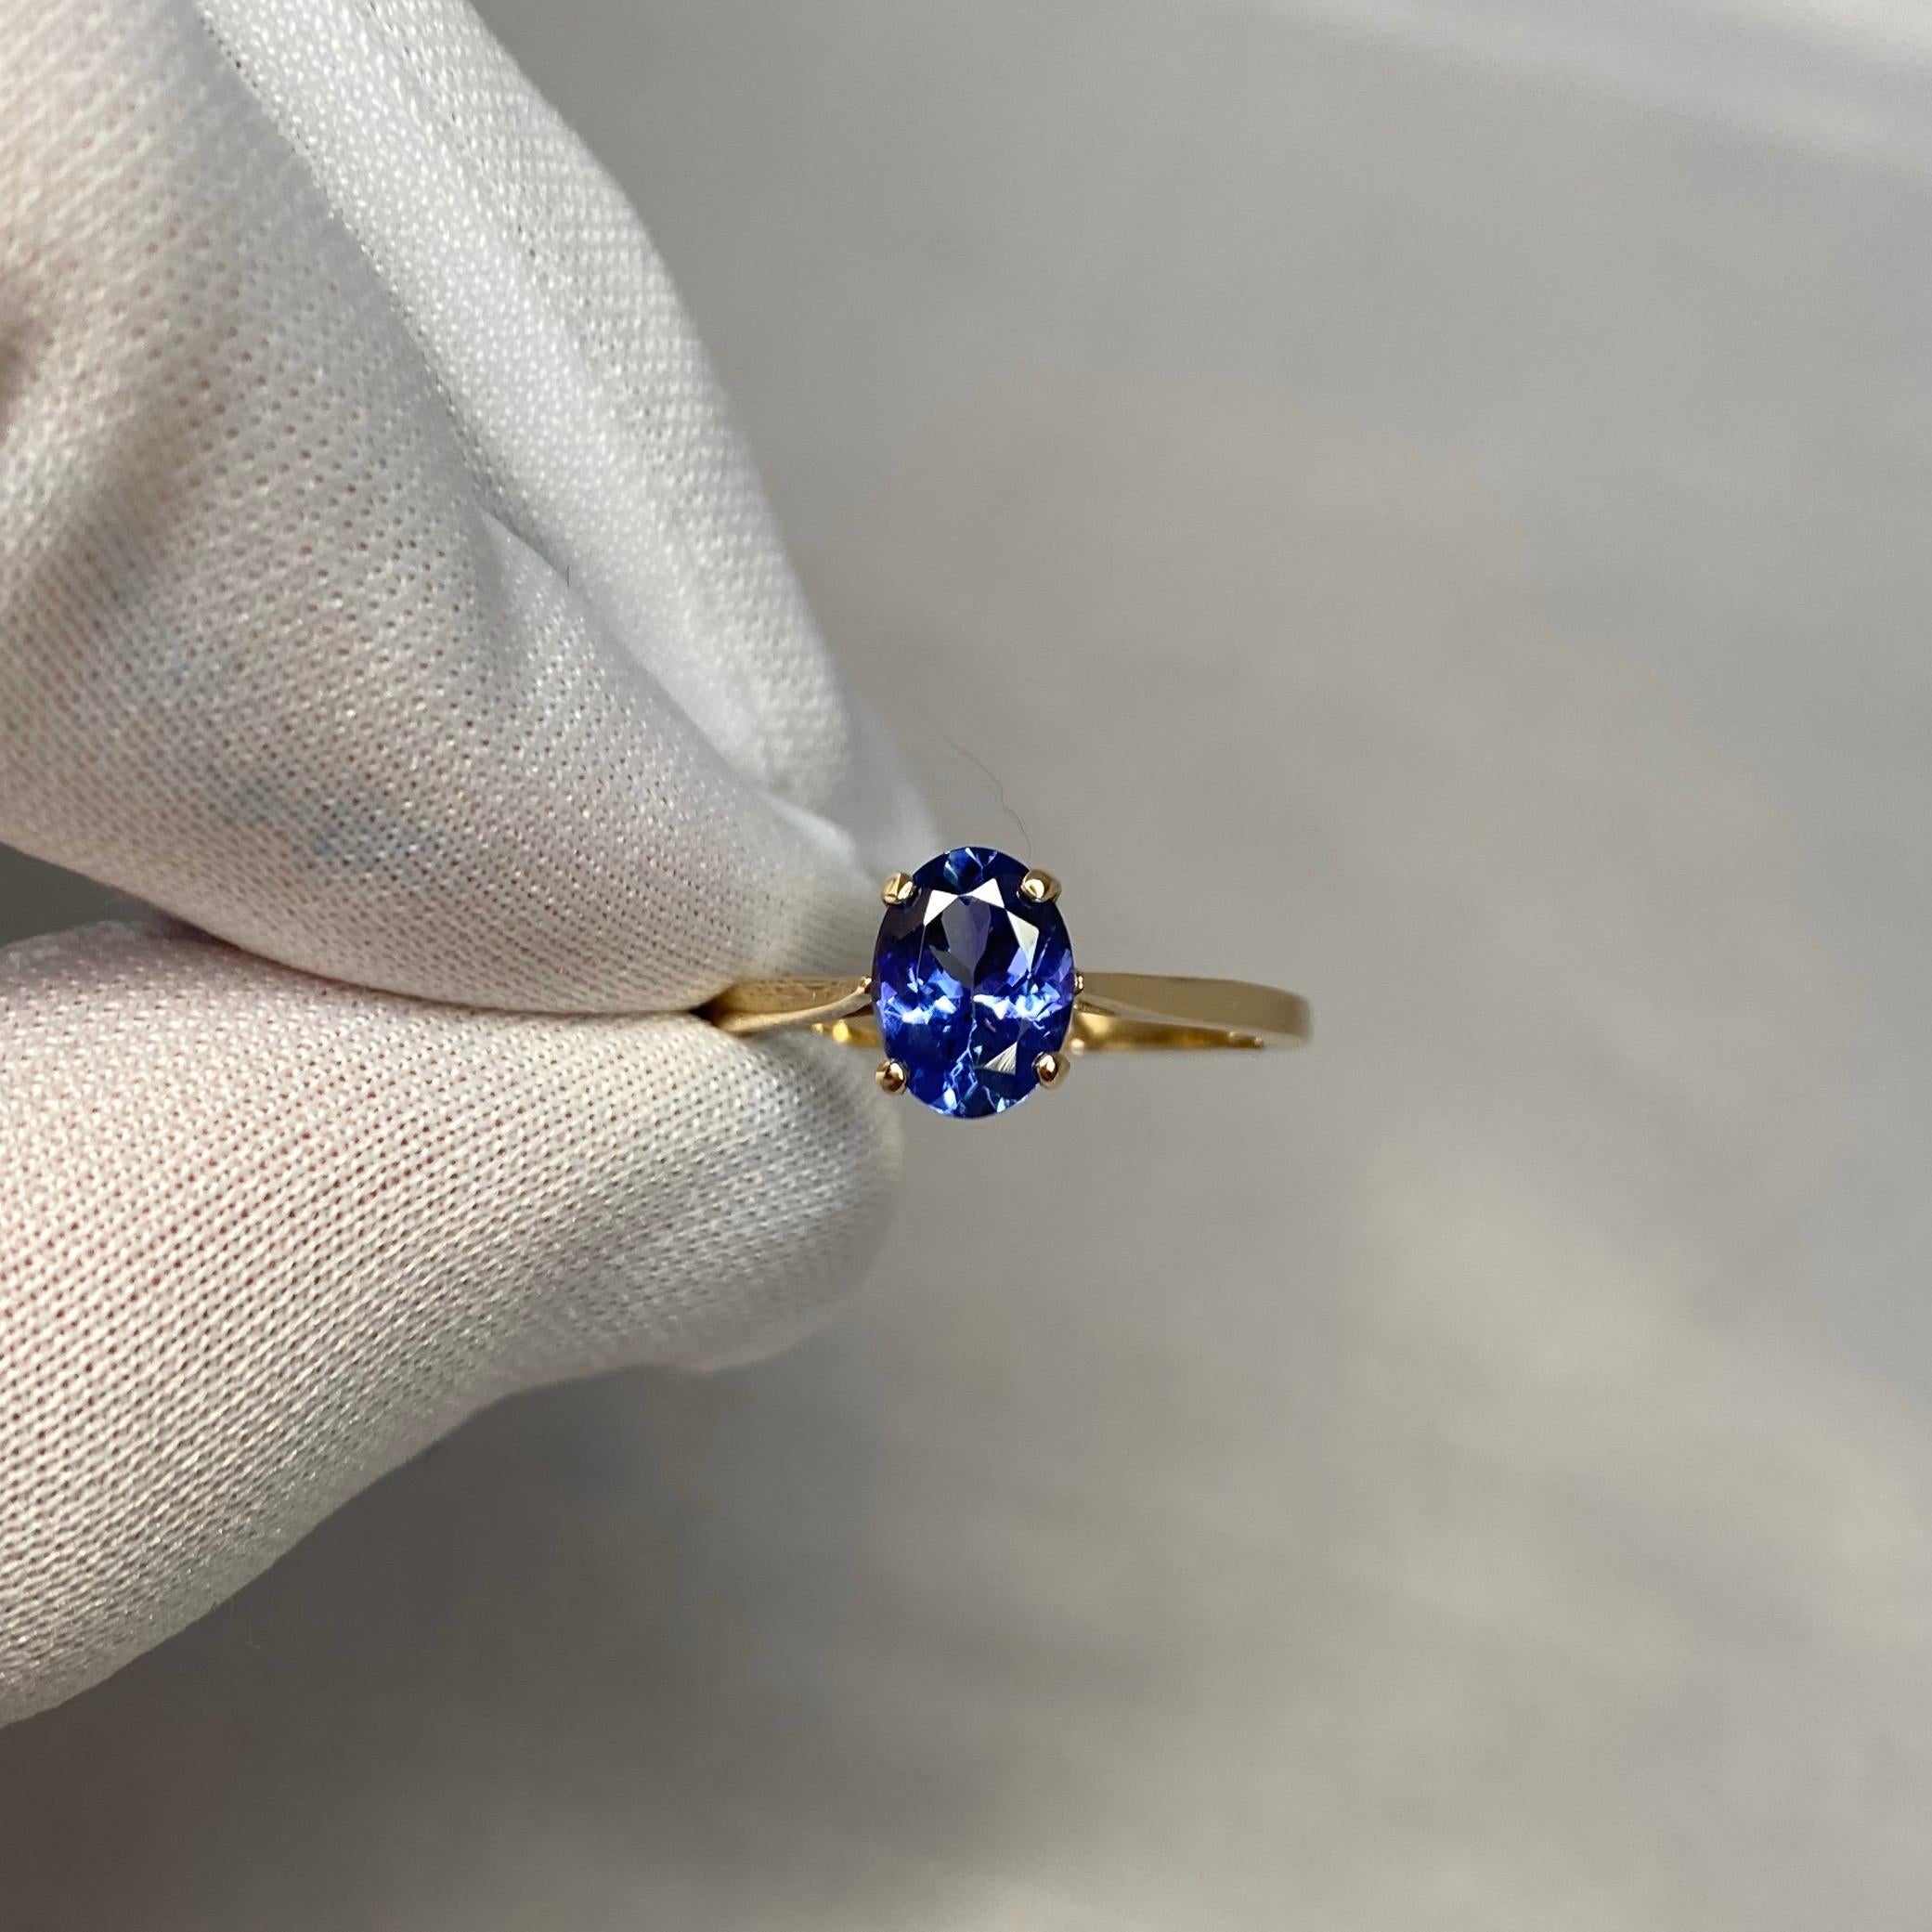 Women's or Men's Vivid Blue Violet 1.34 Carat Tanzanite Oval Cut Yellow Gold Solitaire Ring